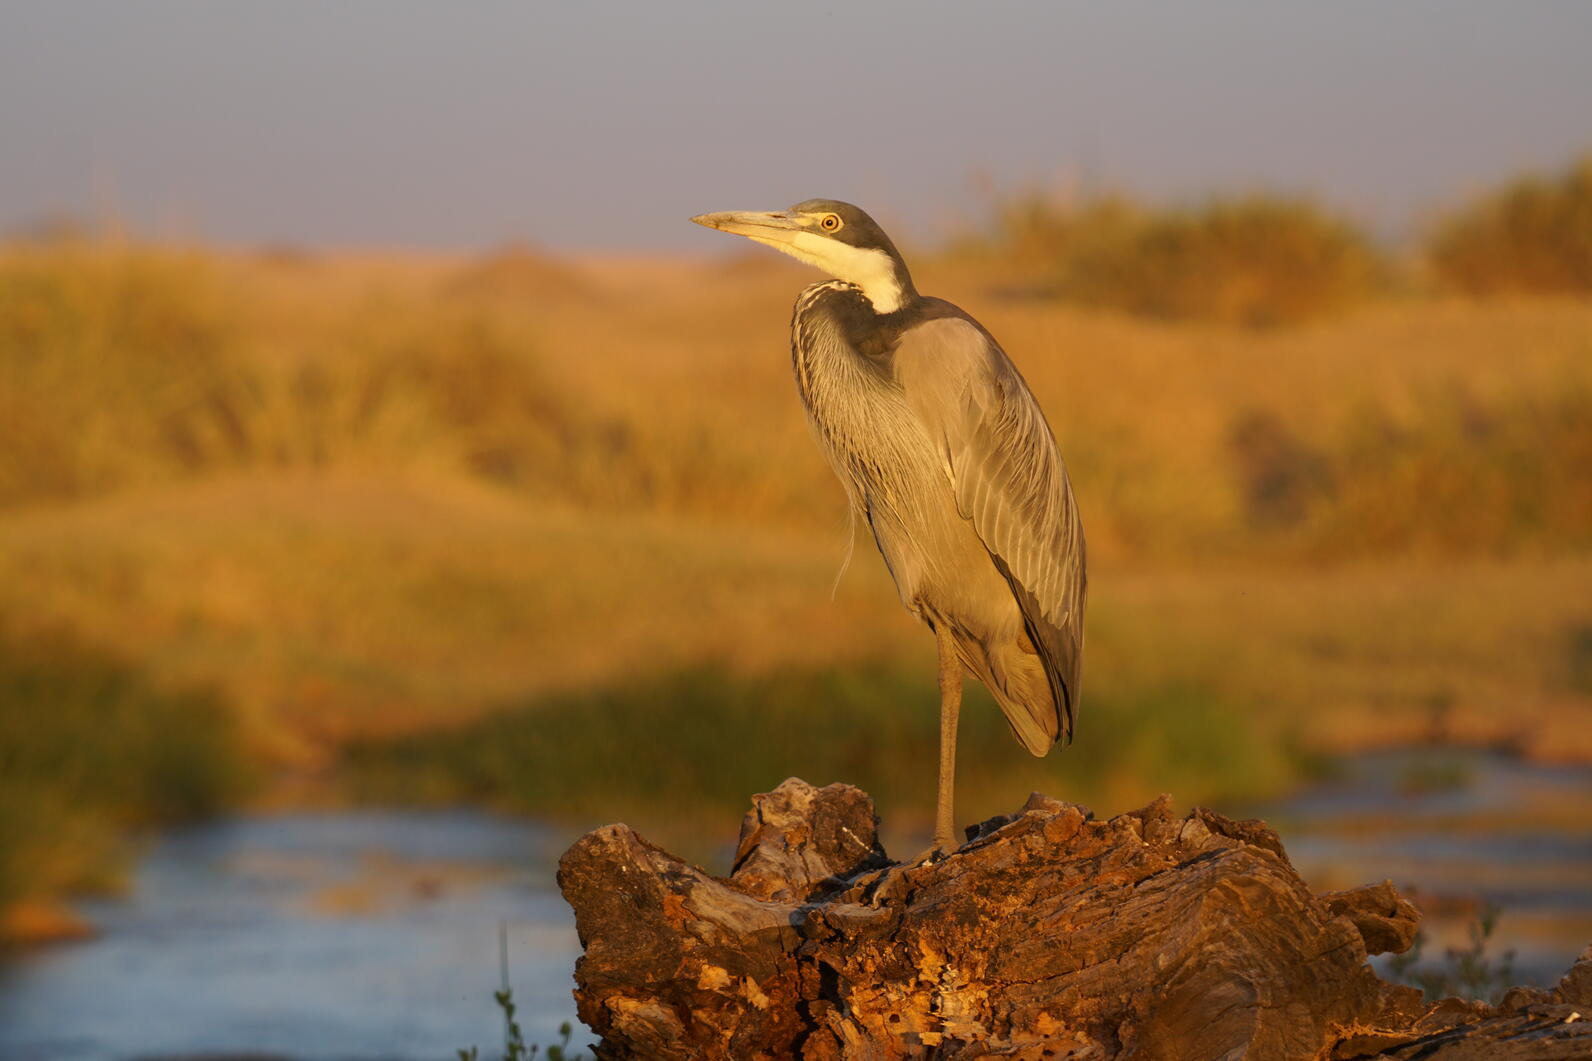 Black-headed Heron standing against a grassland at sunset